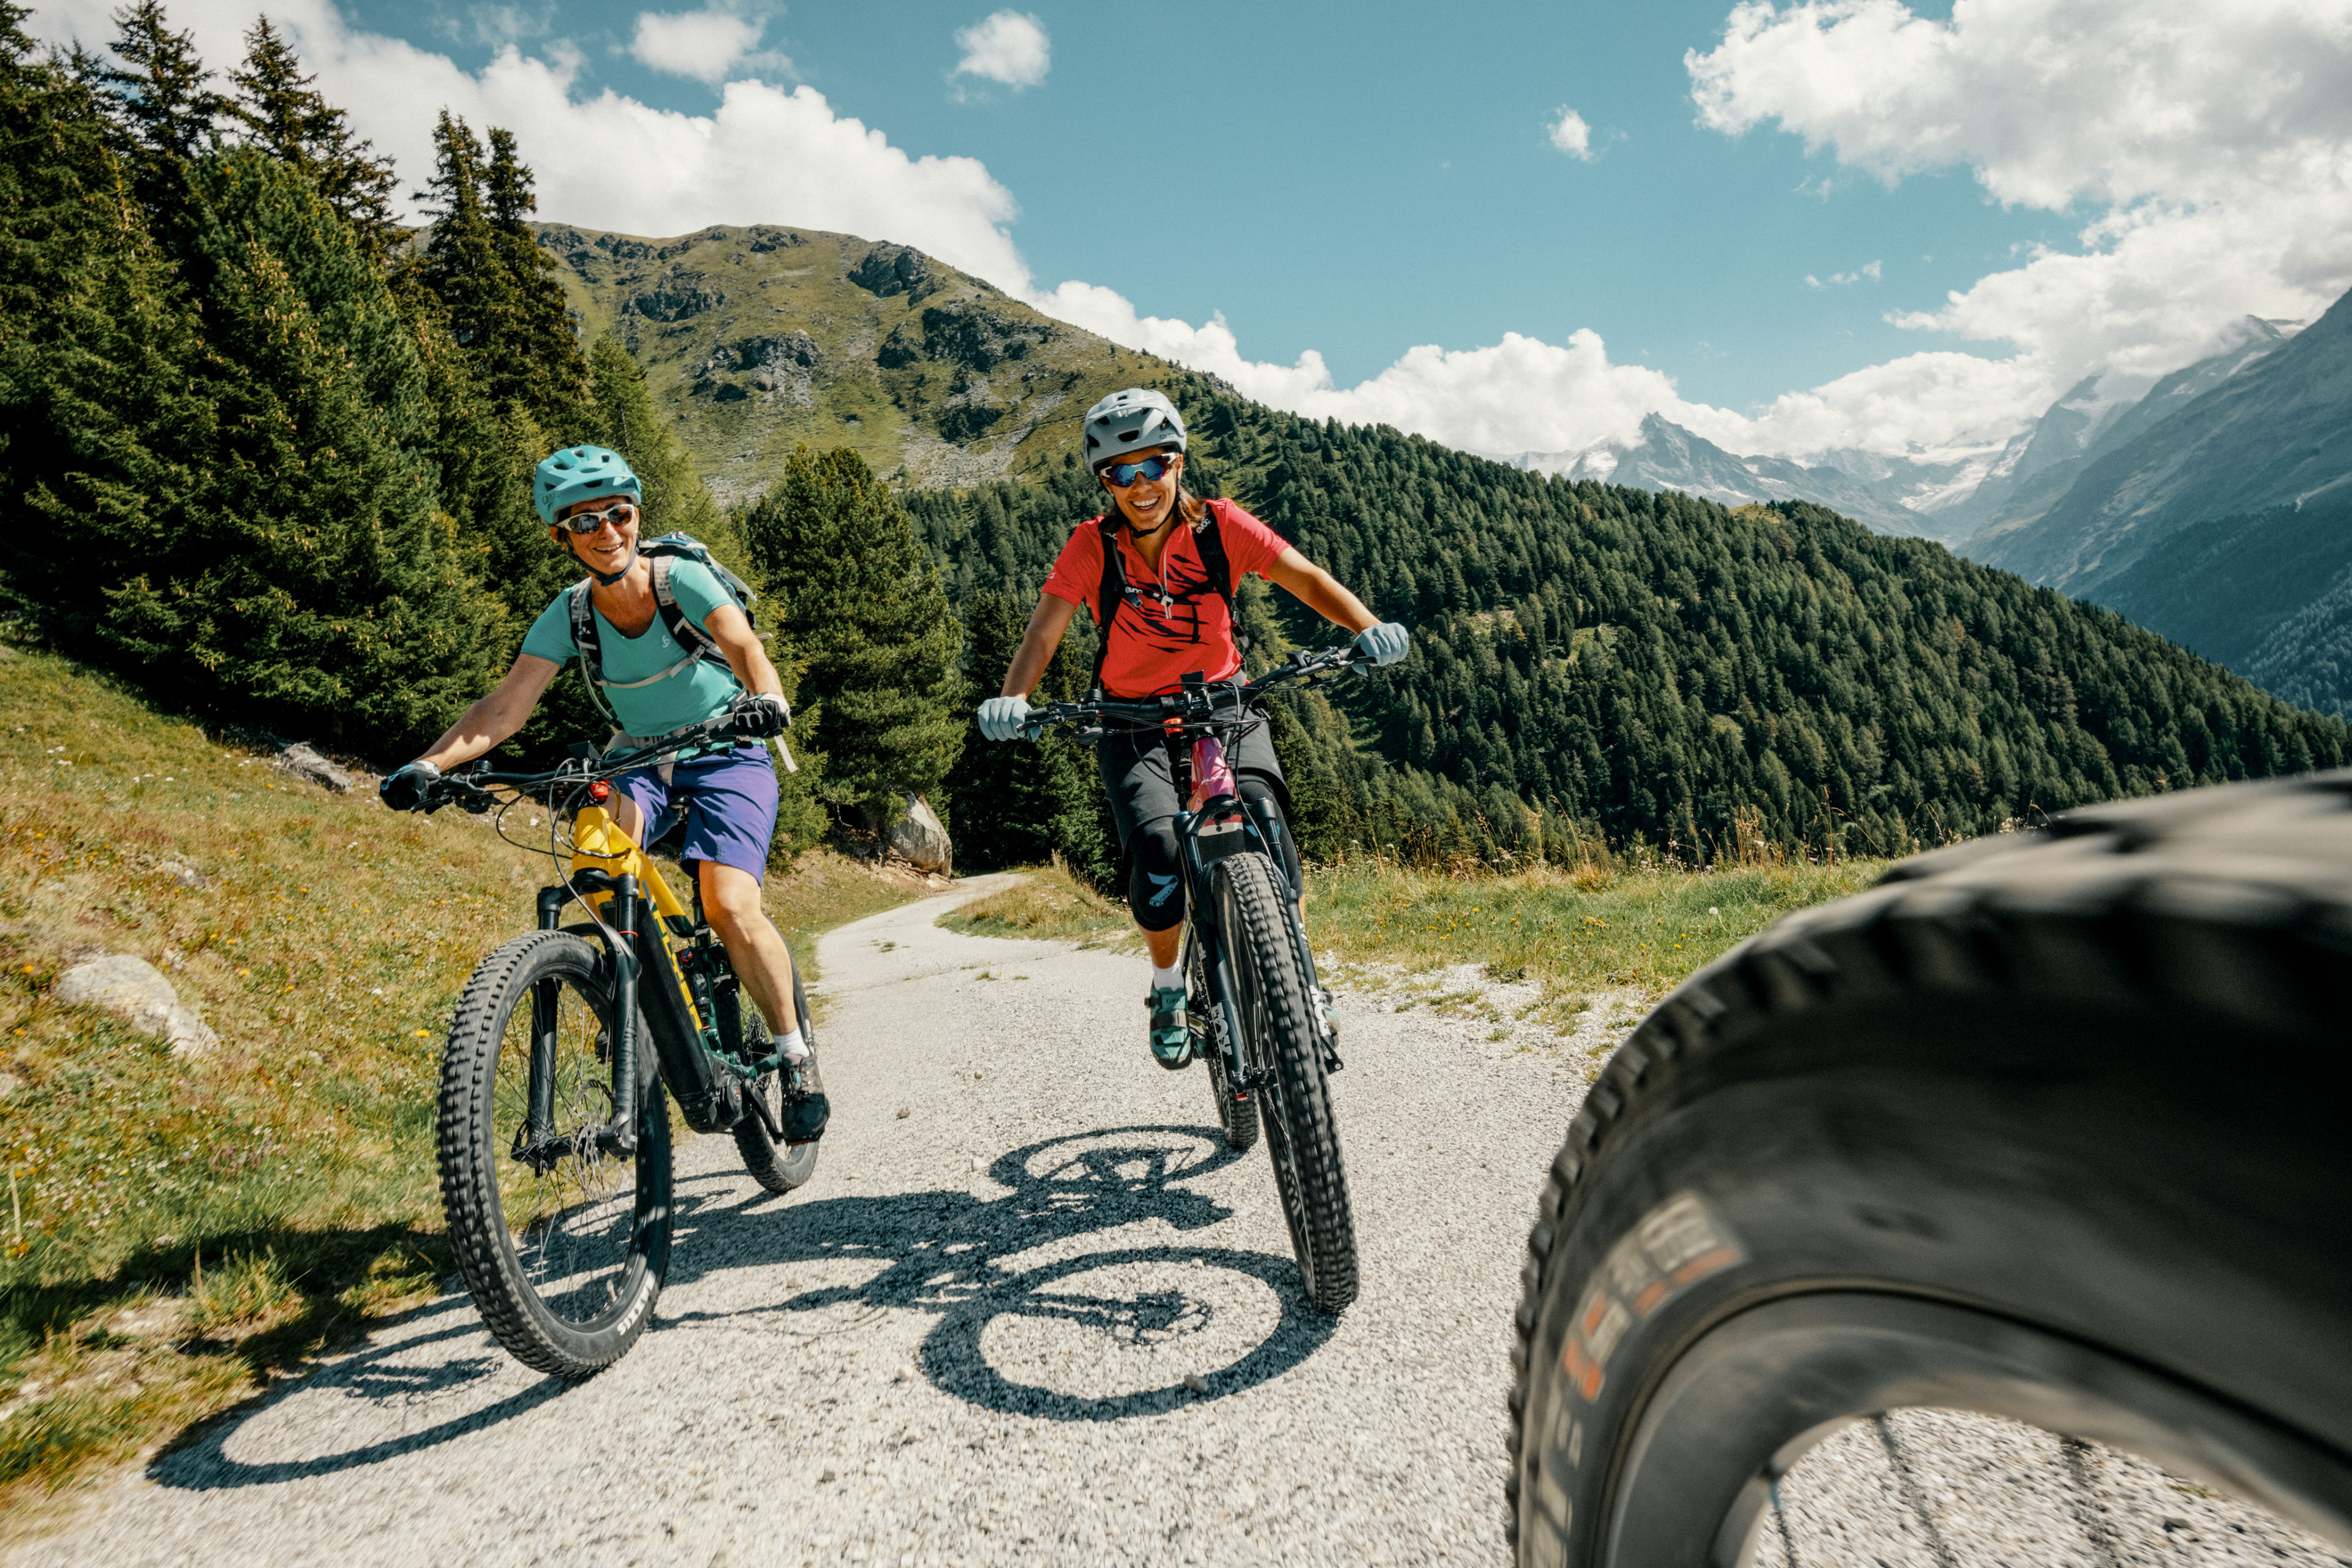 The E-MTB Haute Route tours enable joint active vacations that weld together, Valais, Switzerland